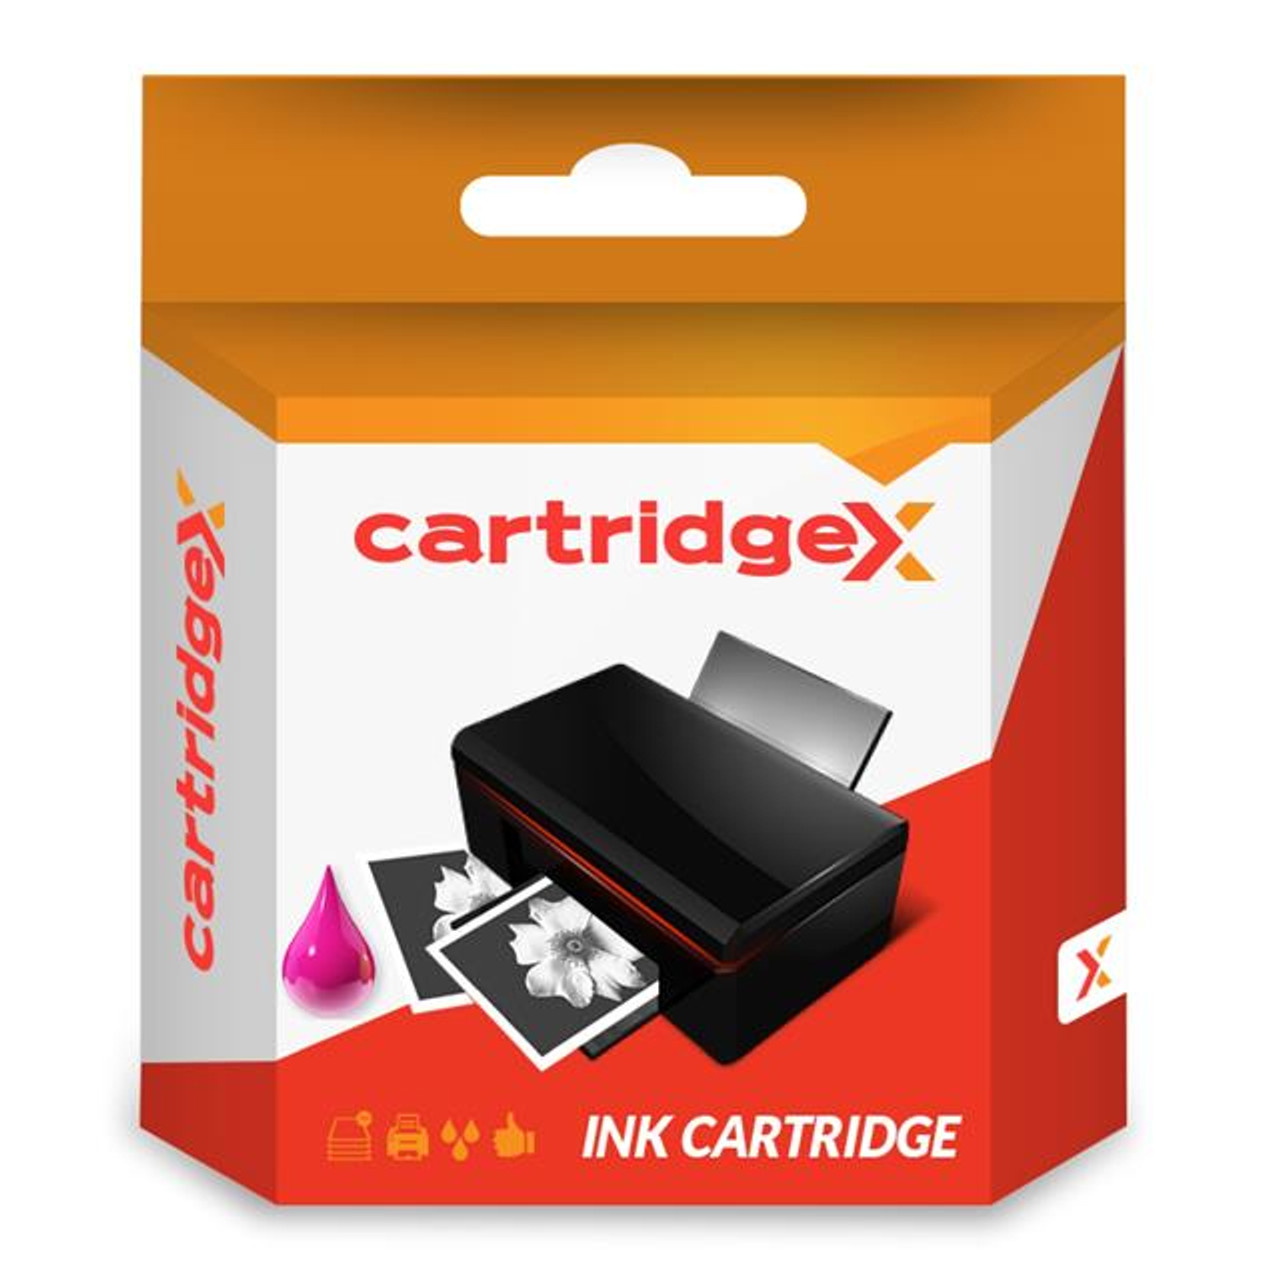 Compatible Magenta Ink Cartridge For Brother Fax-310 Mfc-210c Mfc-215c Lc900 M